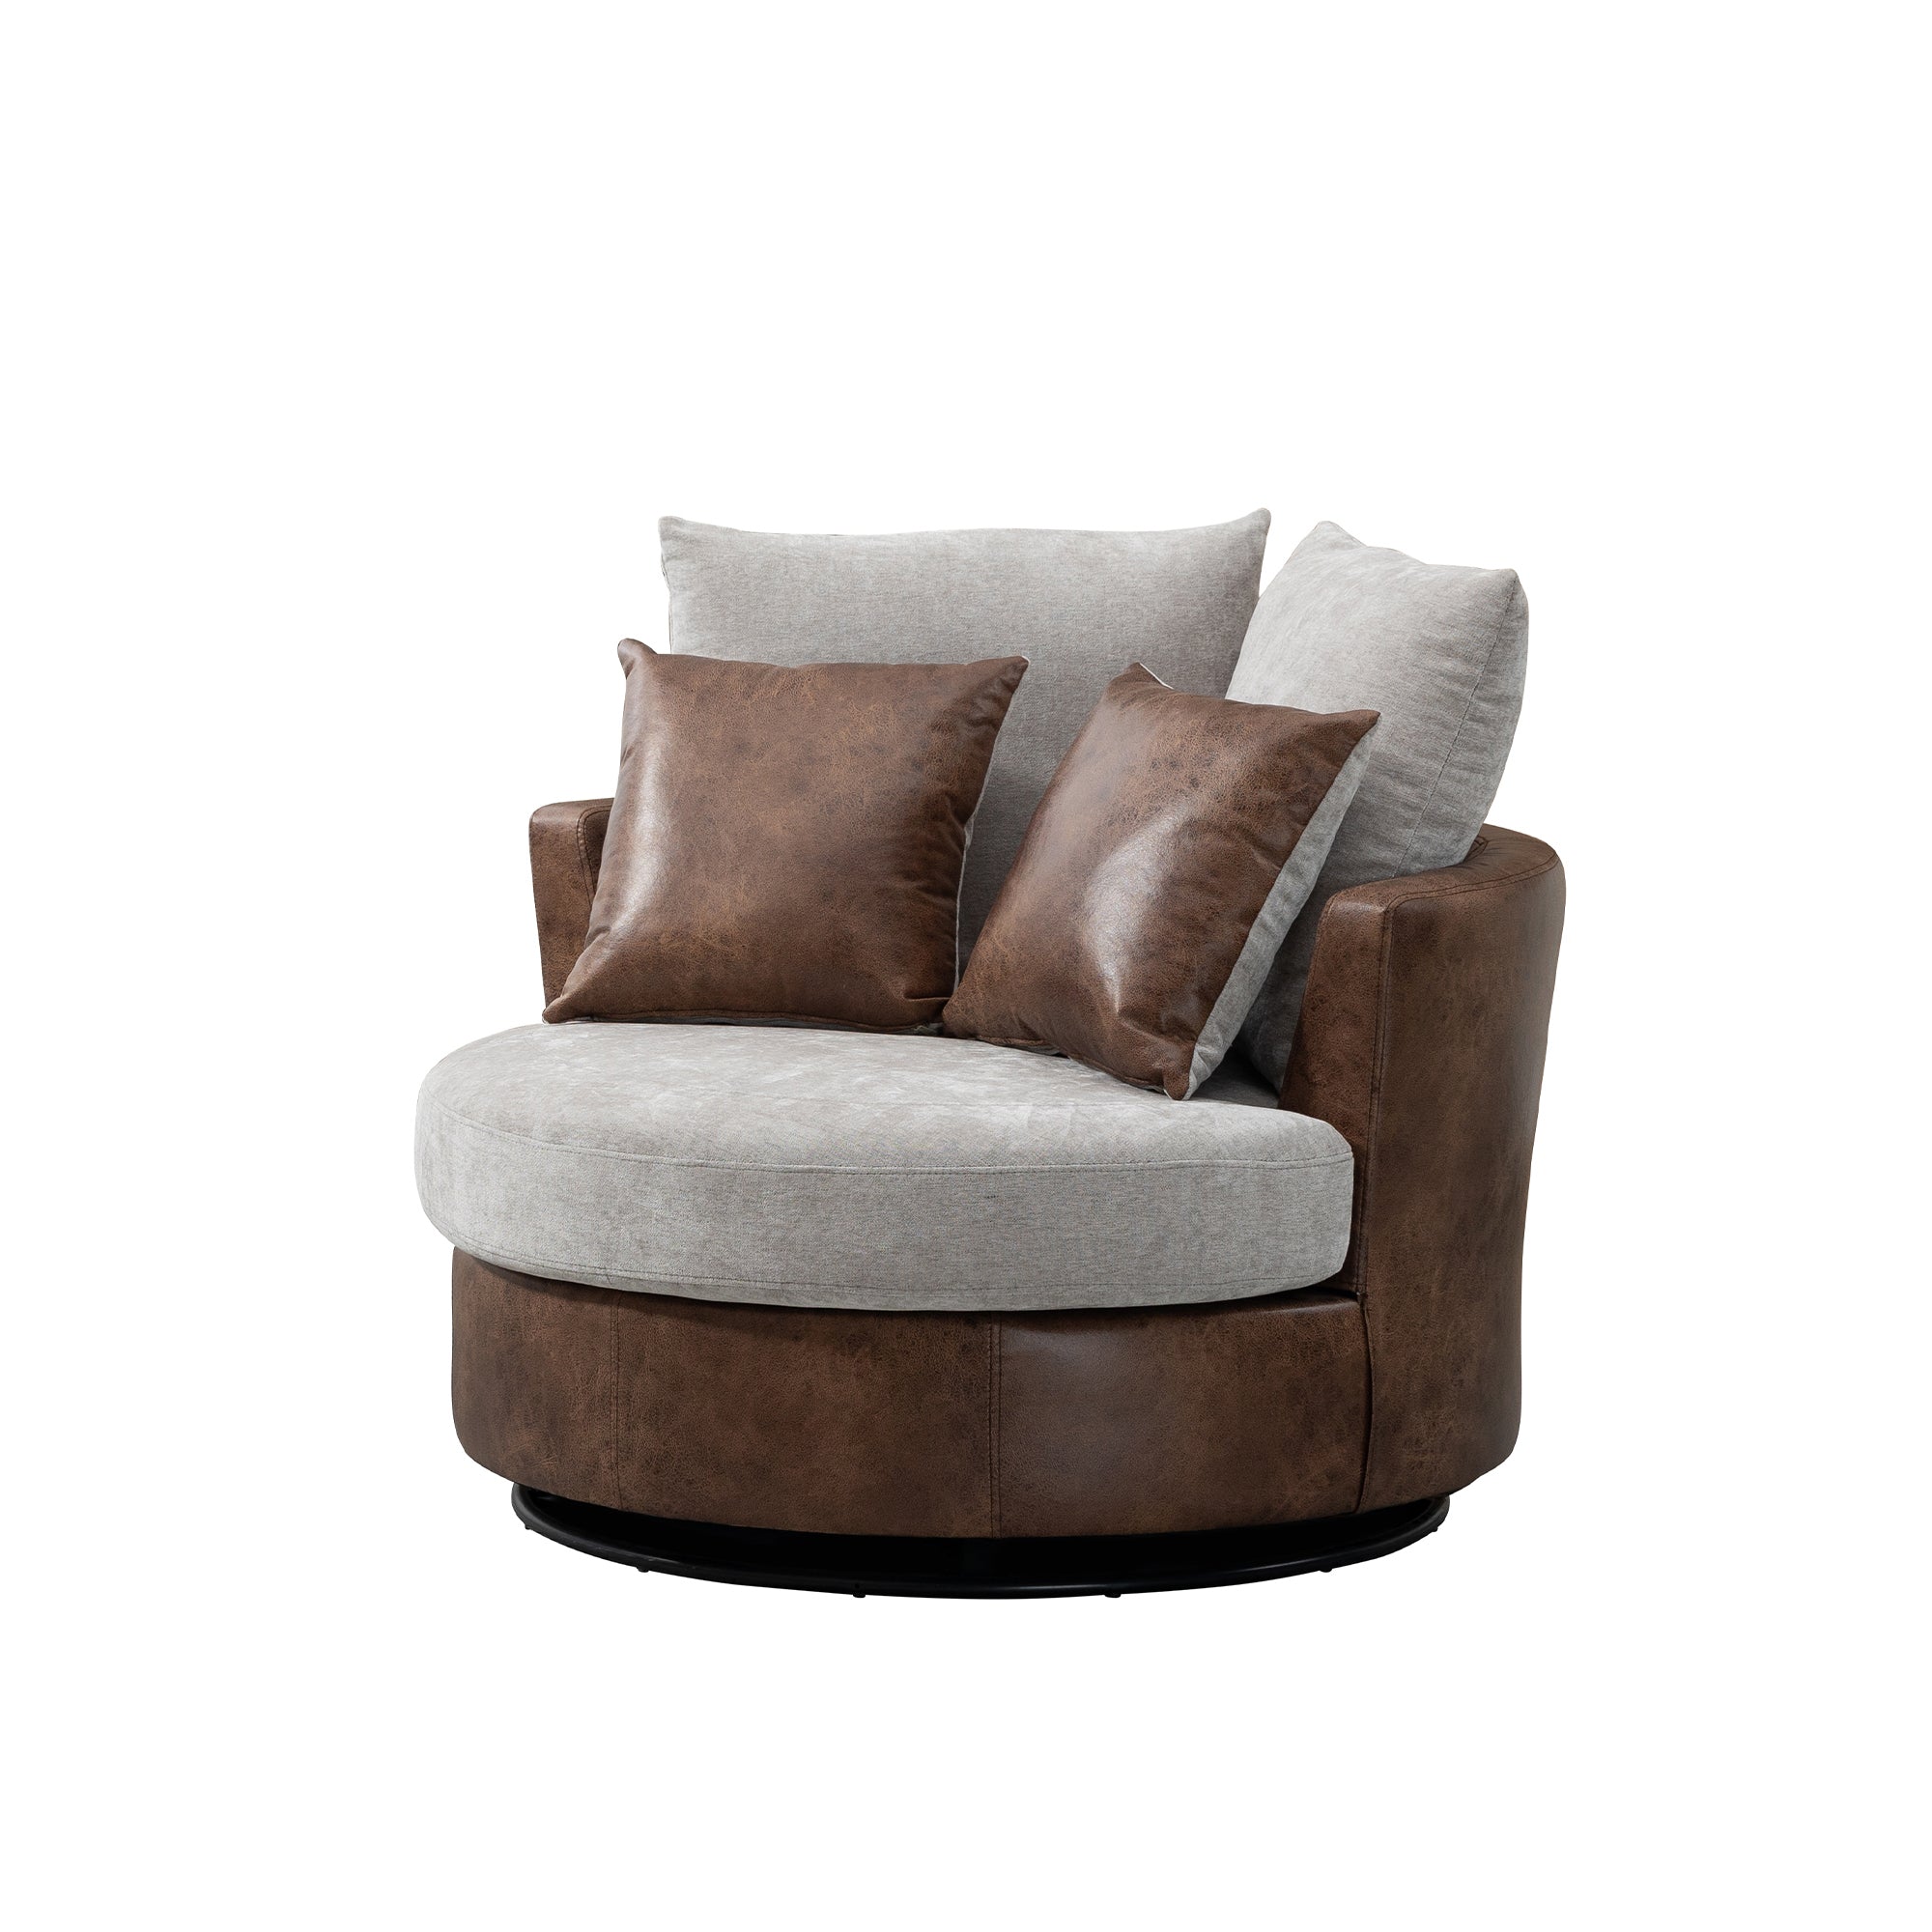 Chair and Sofa With 4 Pillows 360 Degree Swivel Round Sofa